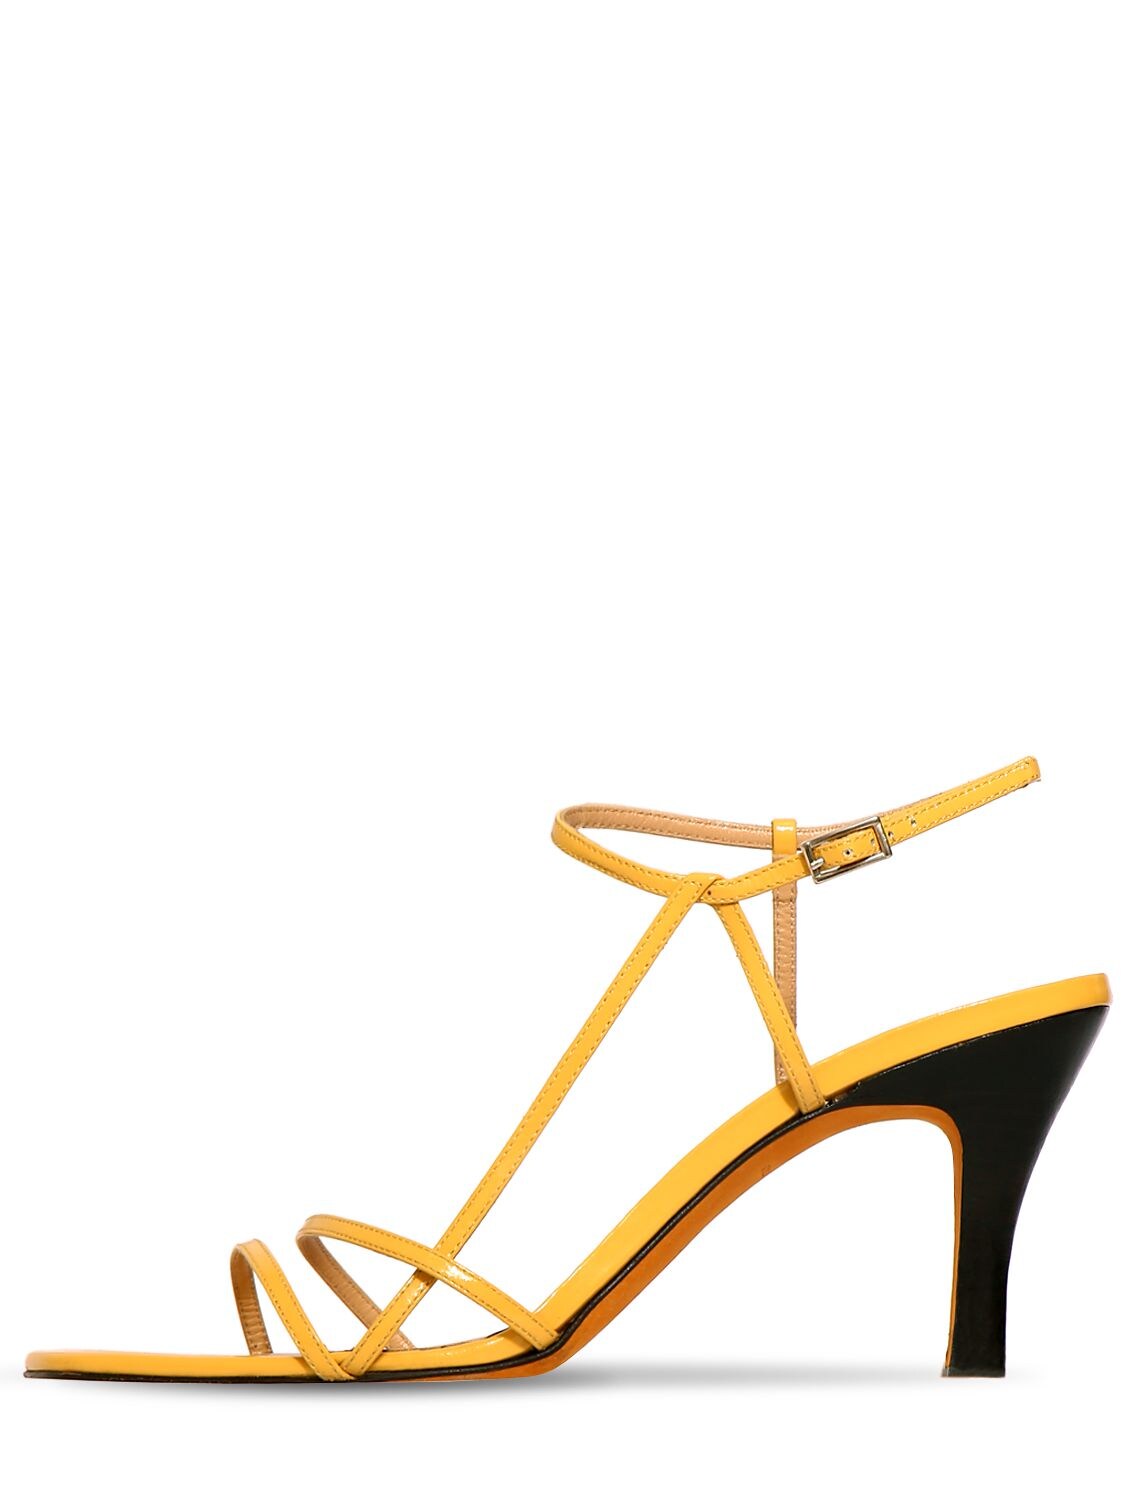 Maryam Nassir Zadeh 95mm Irene Patent Leather Sandals In Yellow